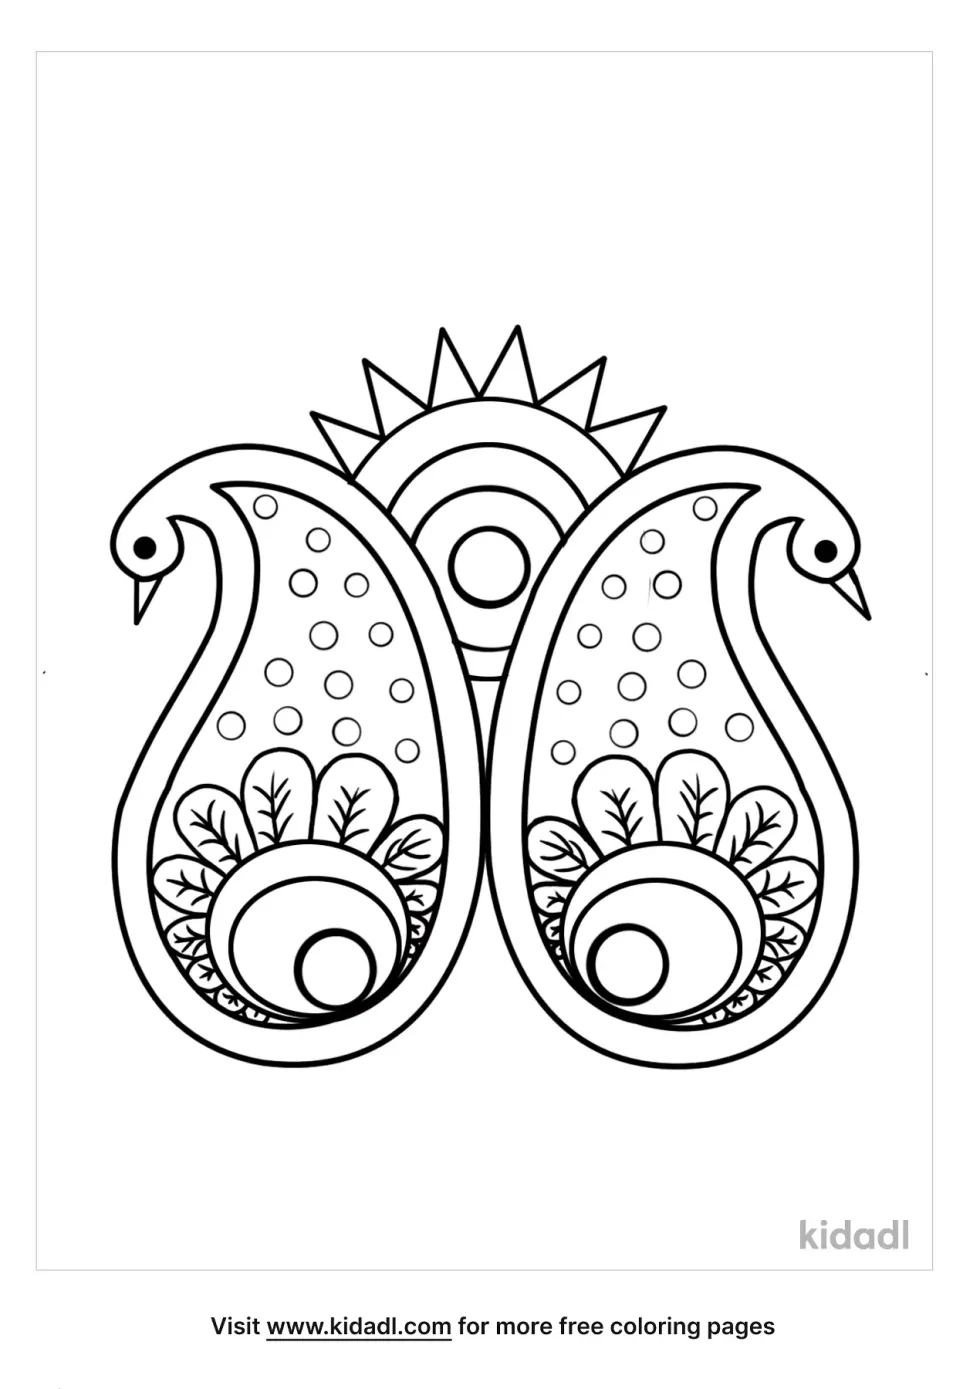 Simple Paisley Coloring Page